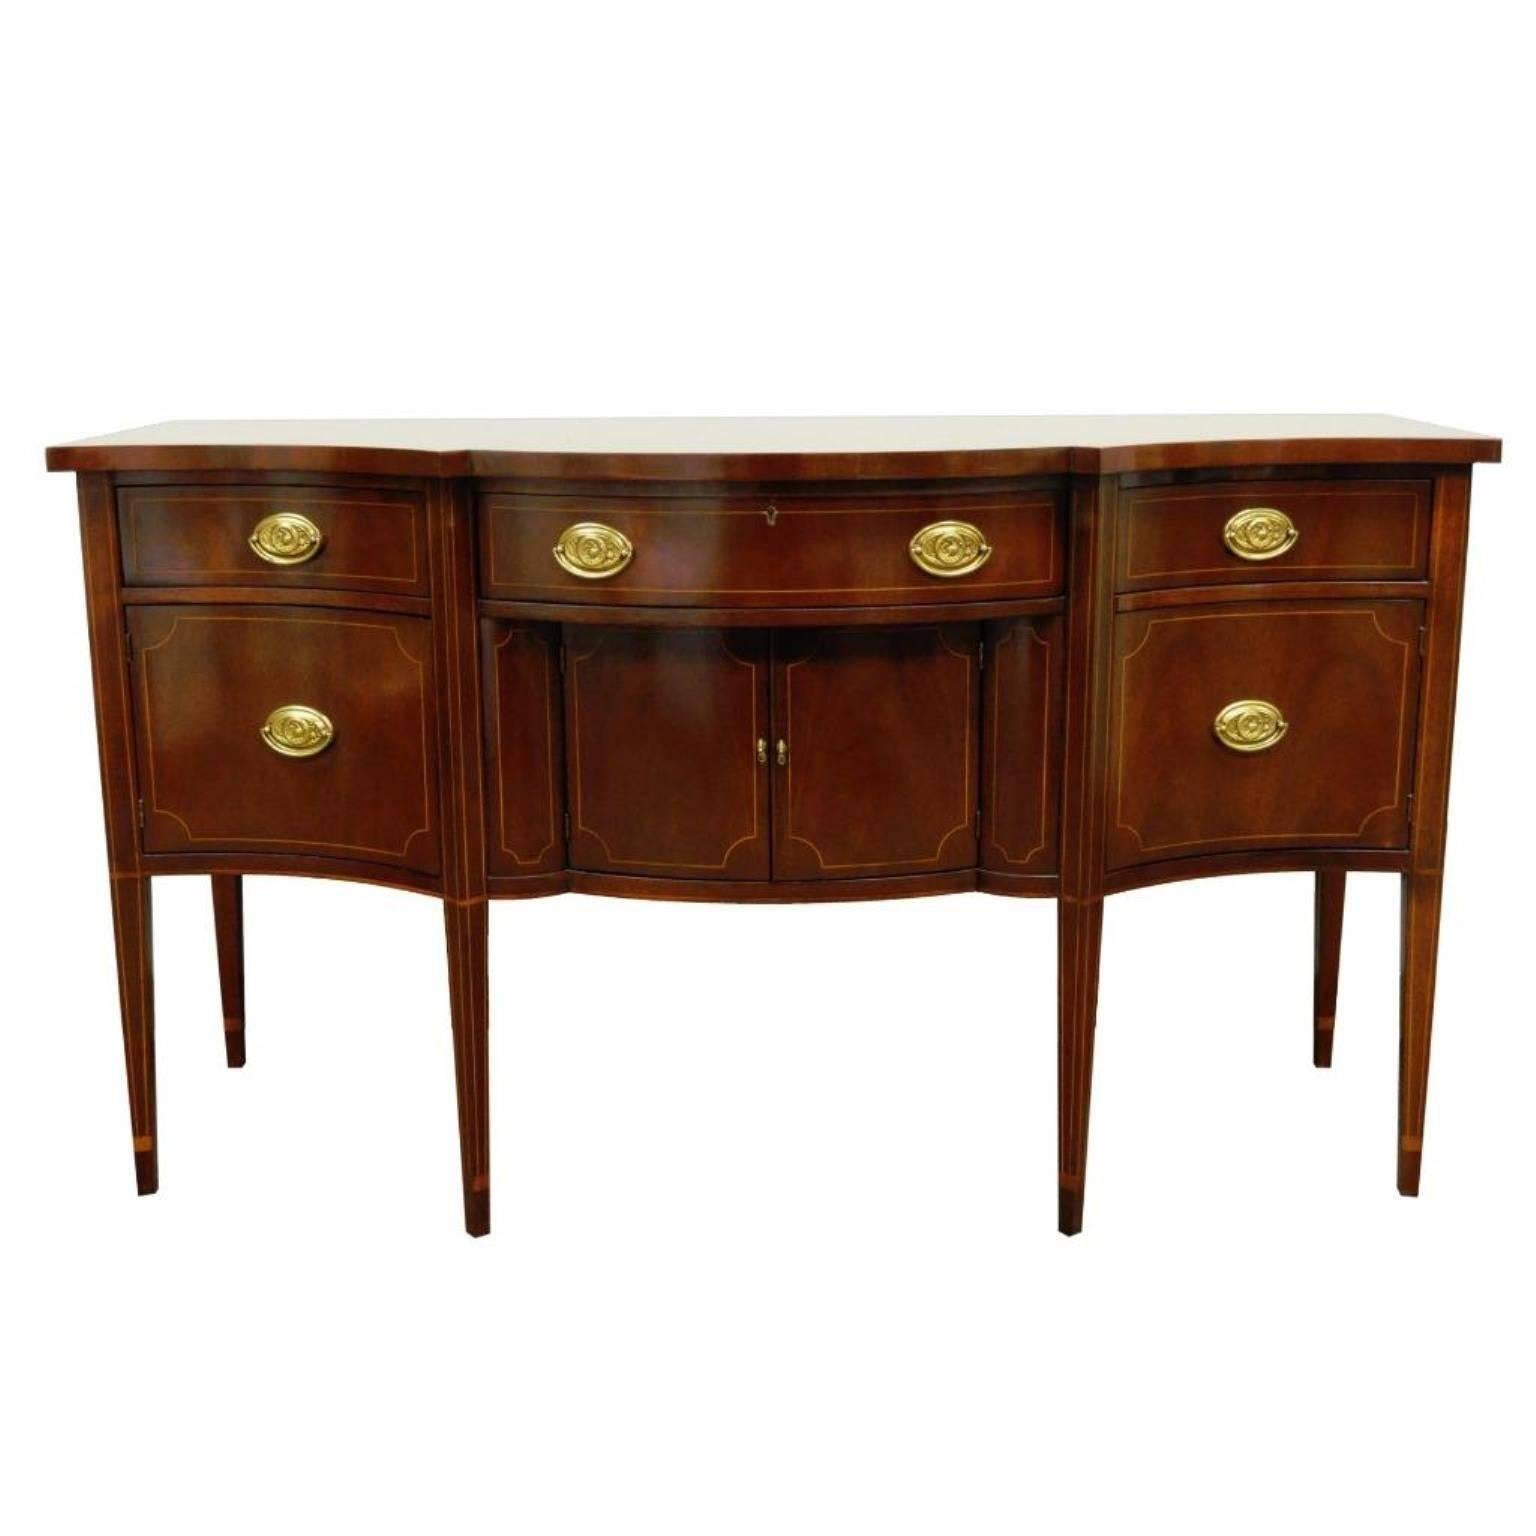 Baker Inlaid Mahogany Bow Front Hepplewhite Federal Style Sideboard Buffet